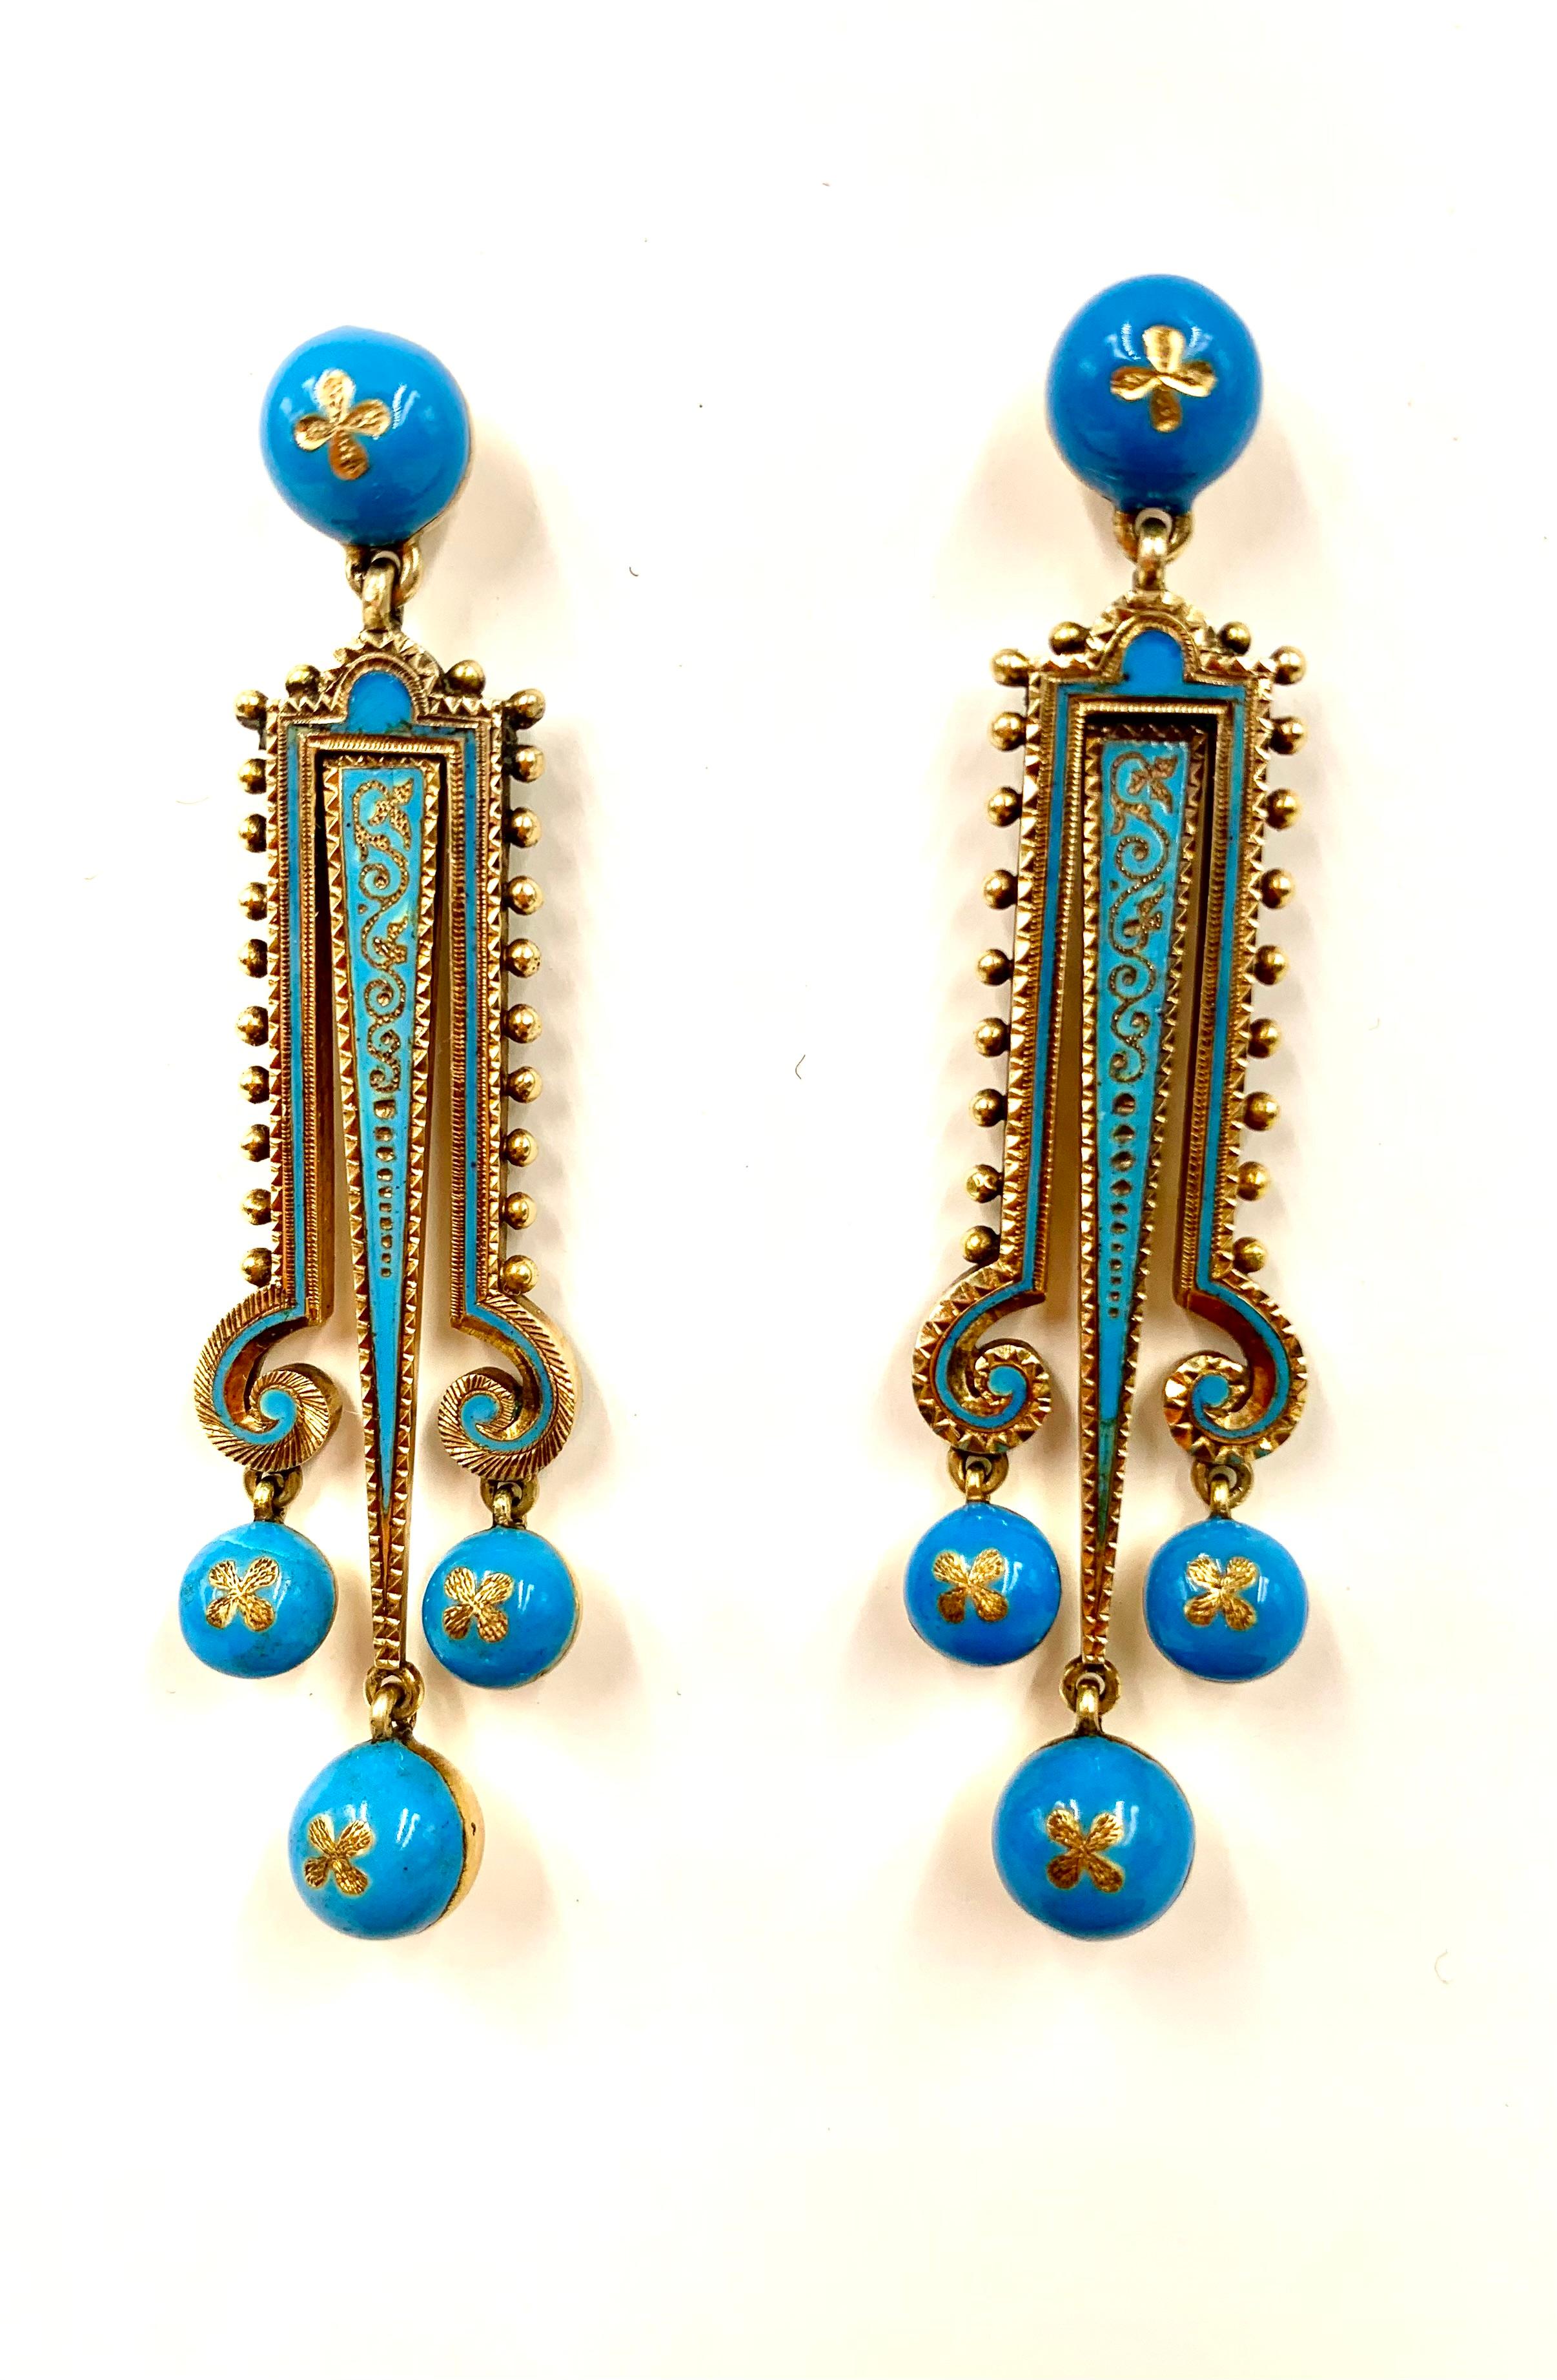 Etruscan Revival Turquoise Enamel 14K Yellow Gold Earrings and Brooch Parure For Sale 2